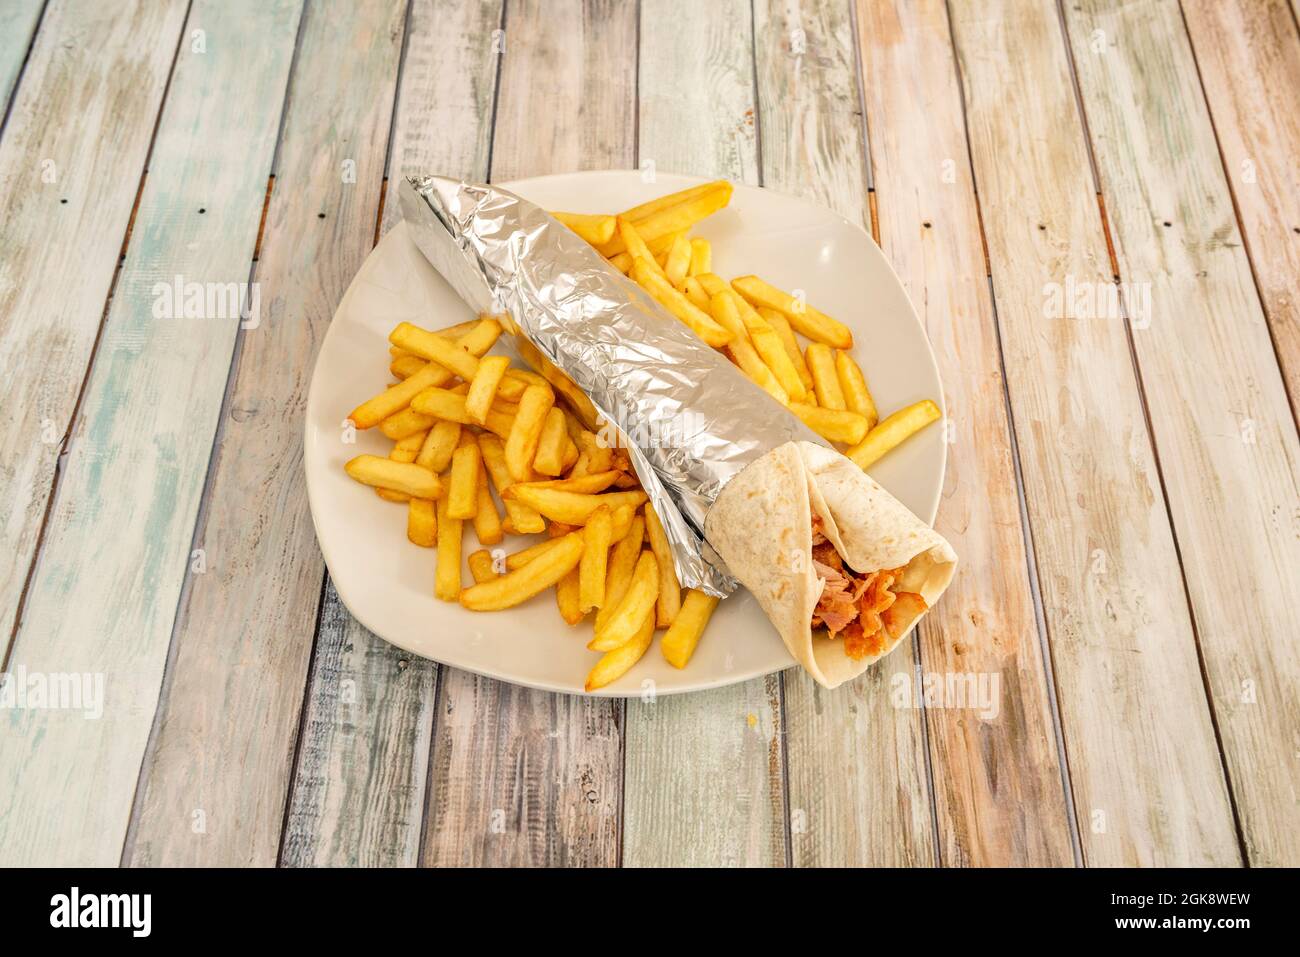 typical durum prepared in a kebab restaurant with a side of french fries and aluminum foil to roll up the omelette Stock Photo